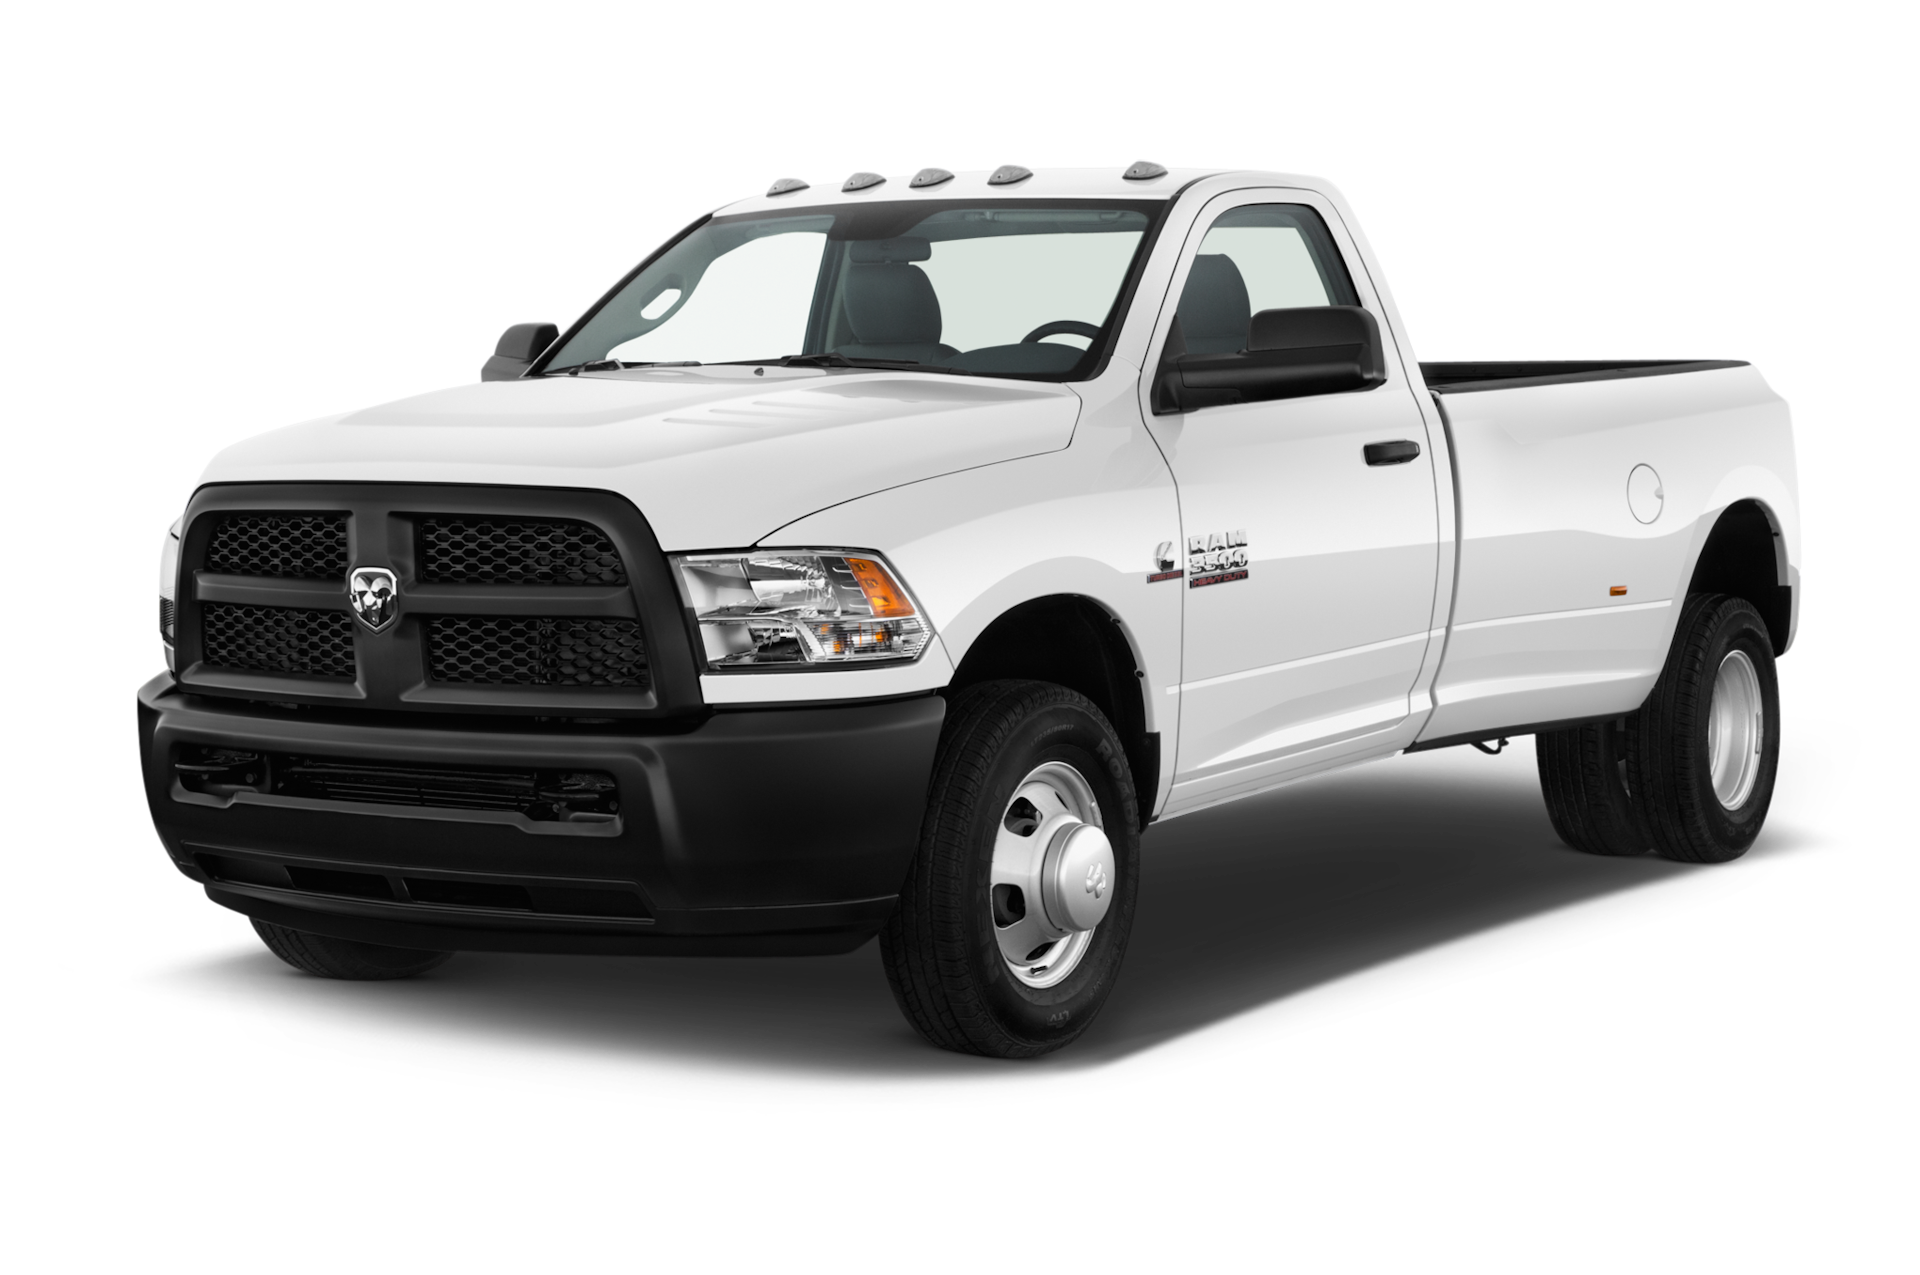 2018 Ram 3500 Prices, Reviews, and Photos - MotorTrend